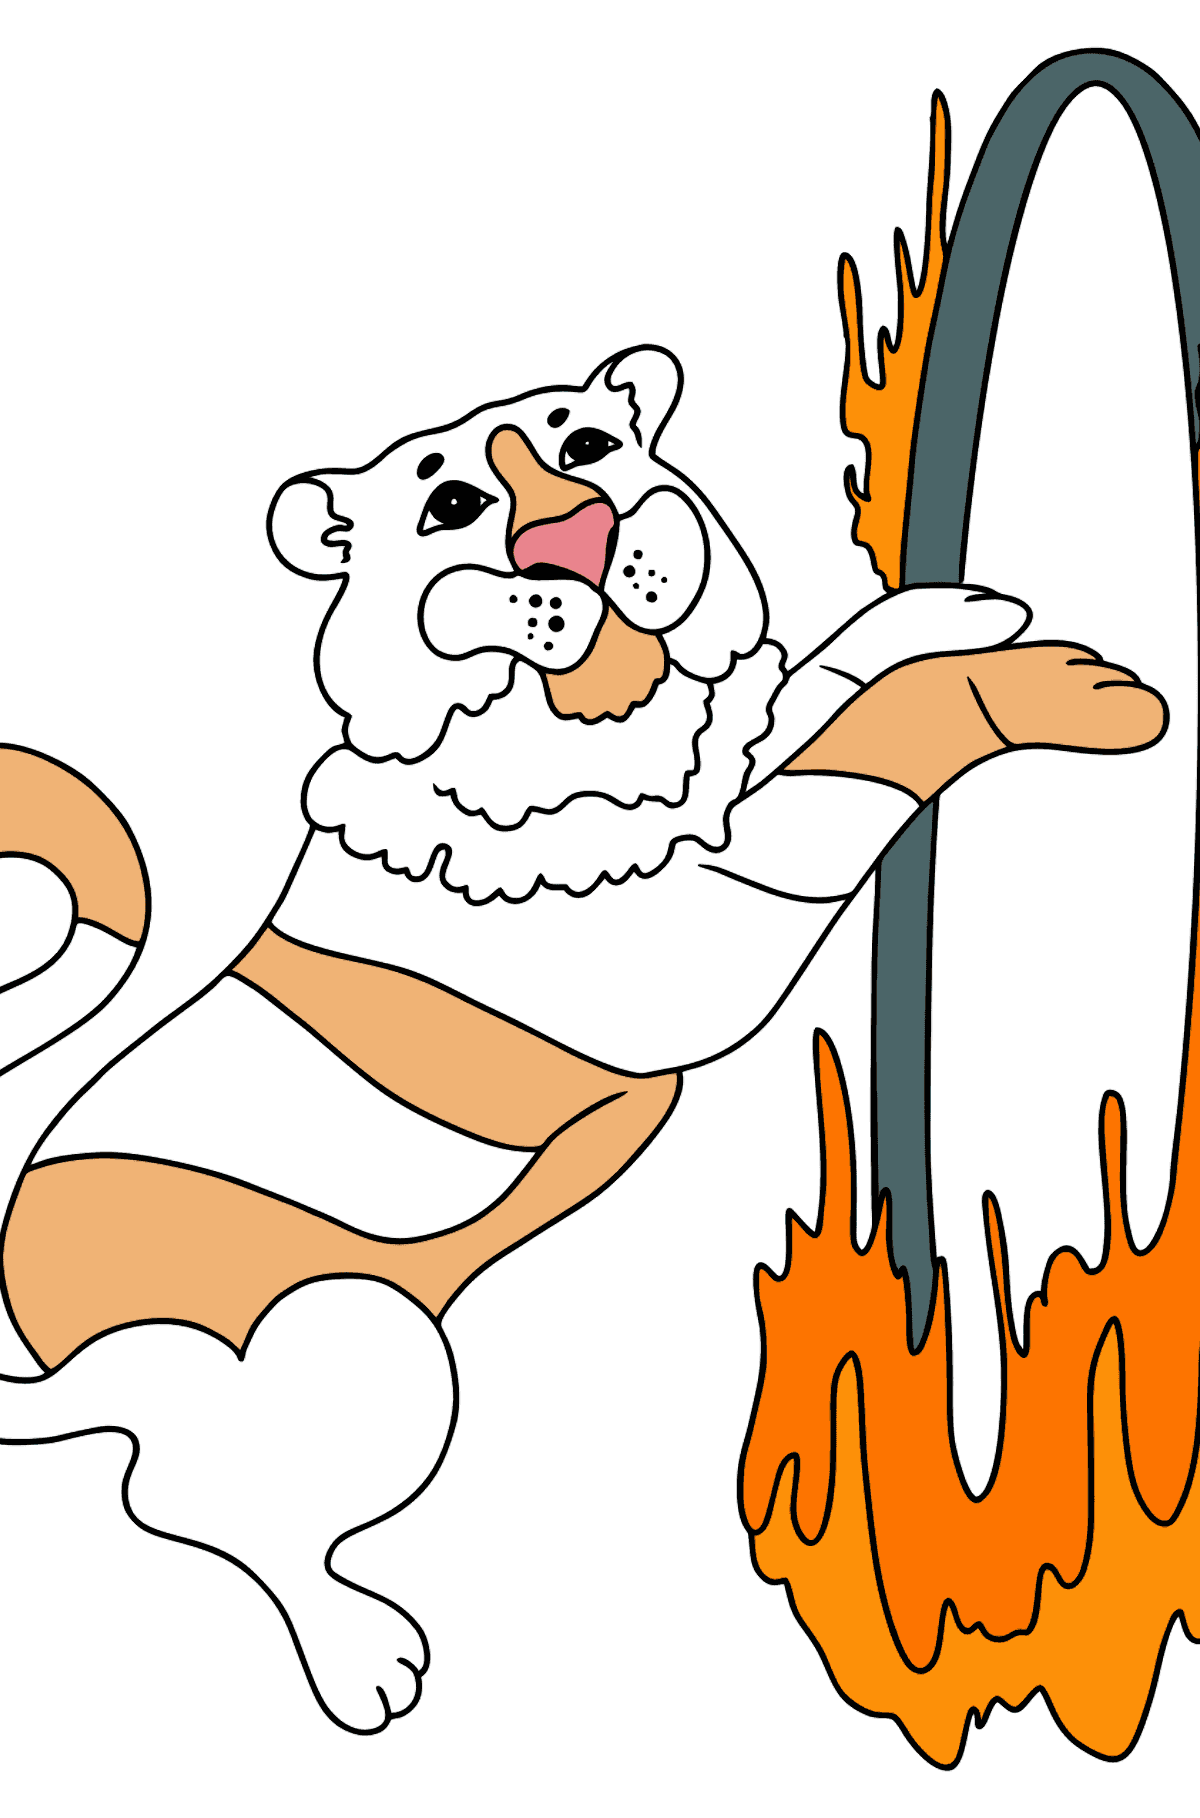 Coloring Page - A Tiger is Jumping Through a Ring of Fire - Coloring Pages for Kids